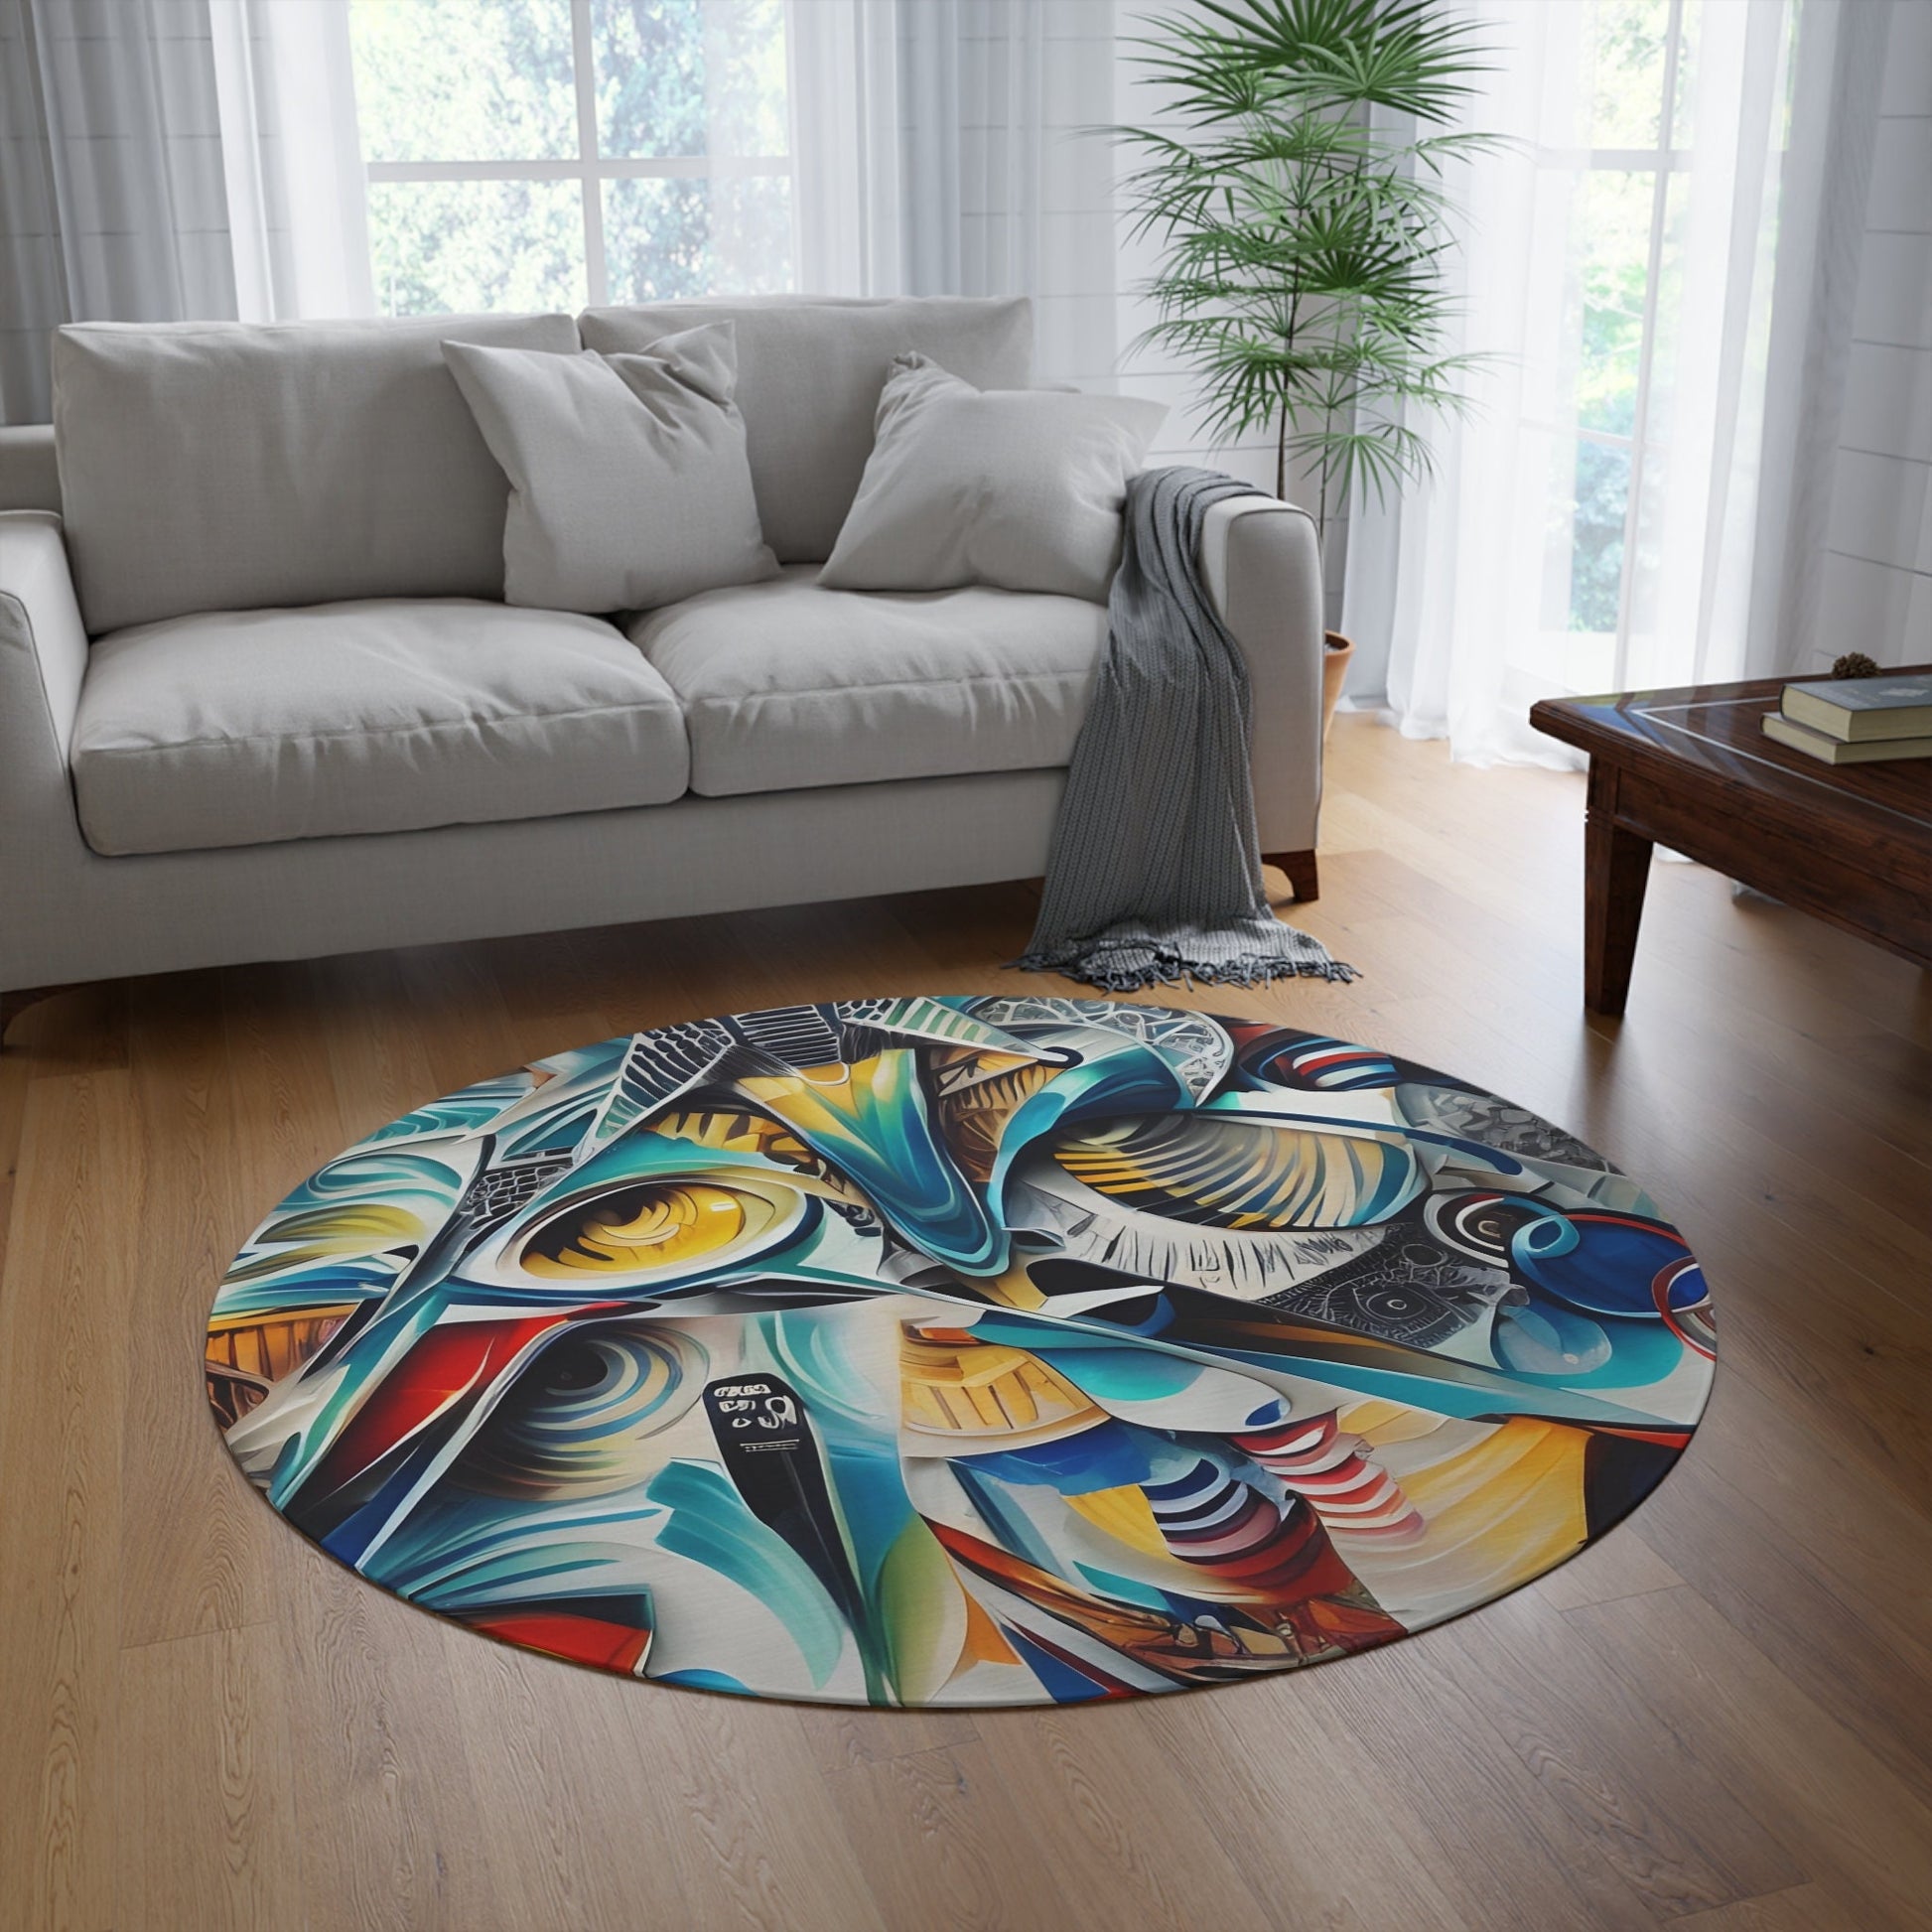 Abstract Rug graffiti blue orange african rugs colorful 2x3 3x5 5x7 round 8x10 large rugs africa floor mat street art